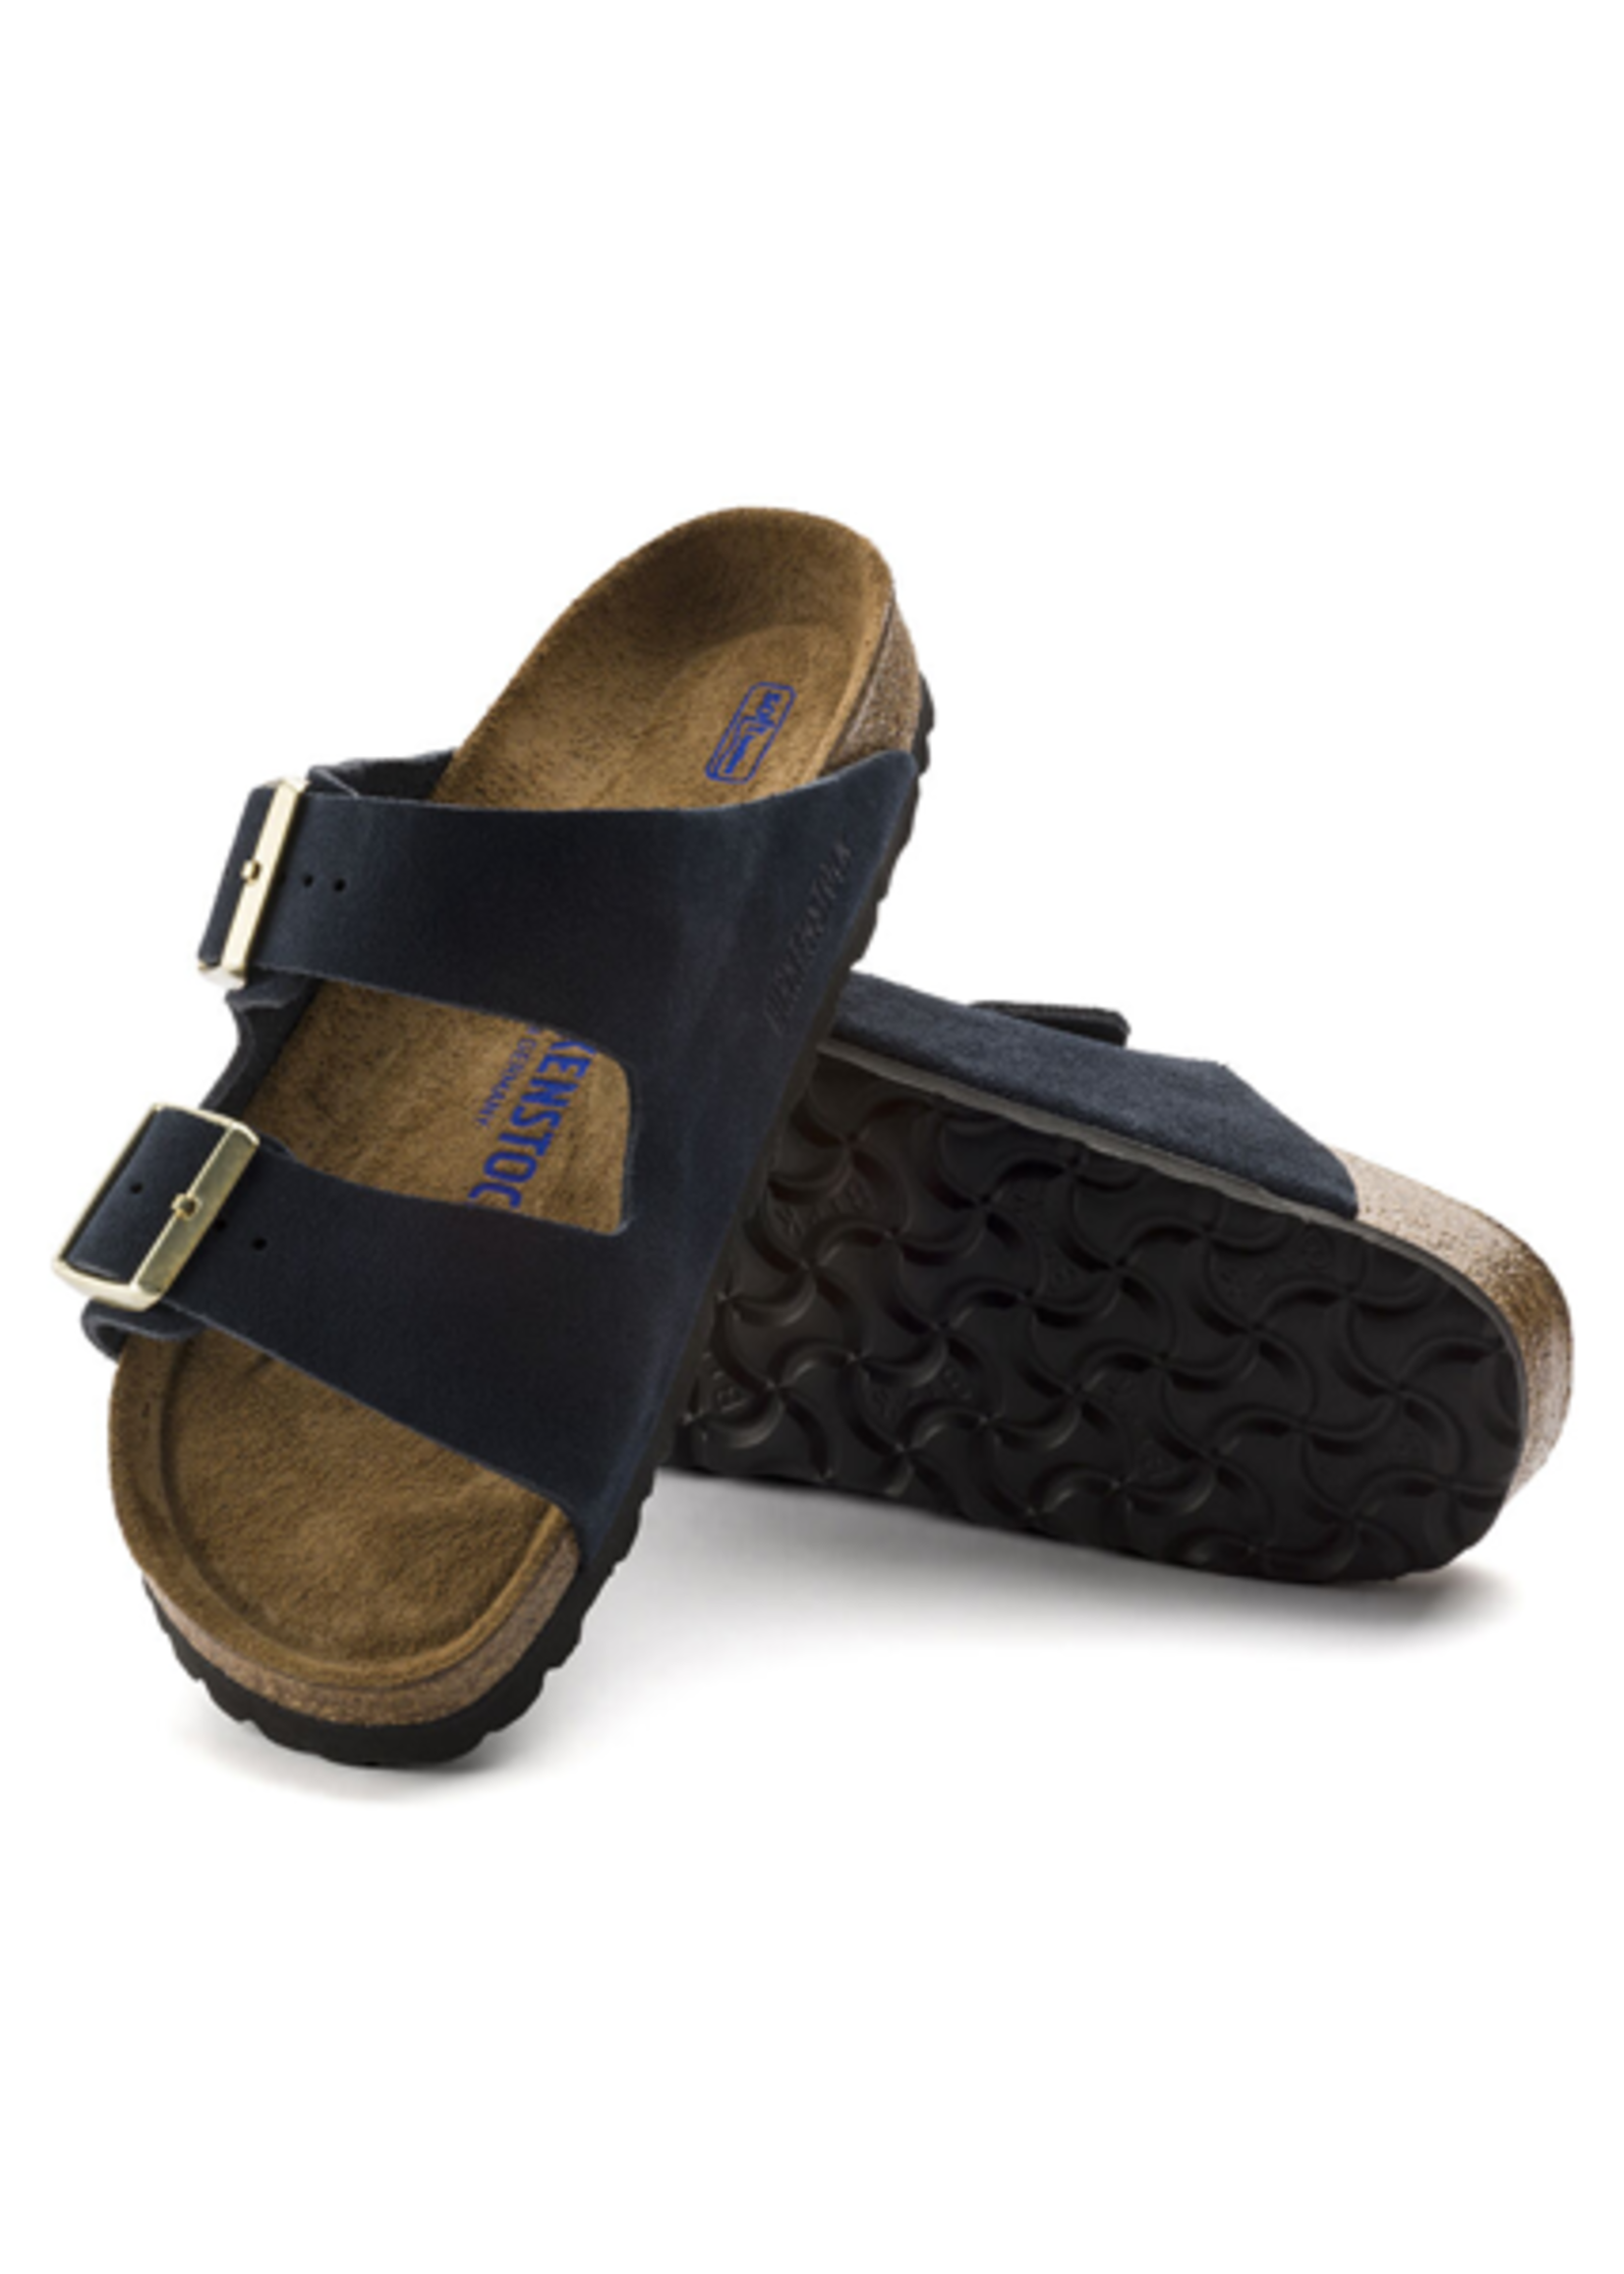 Birkenstock Arizona - Suede Leather in Navy (Soft Footbed - Suede Lined)